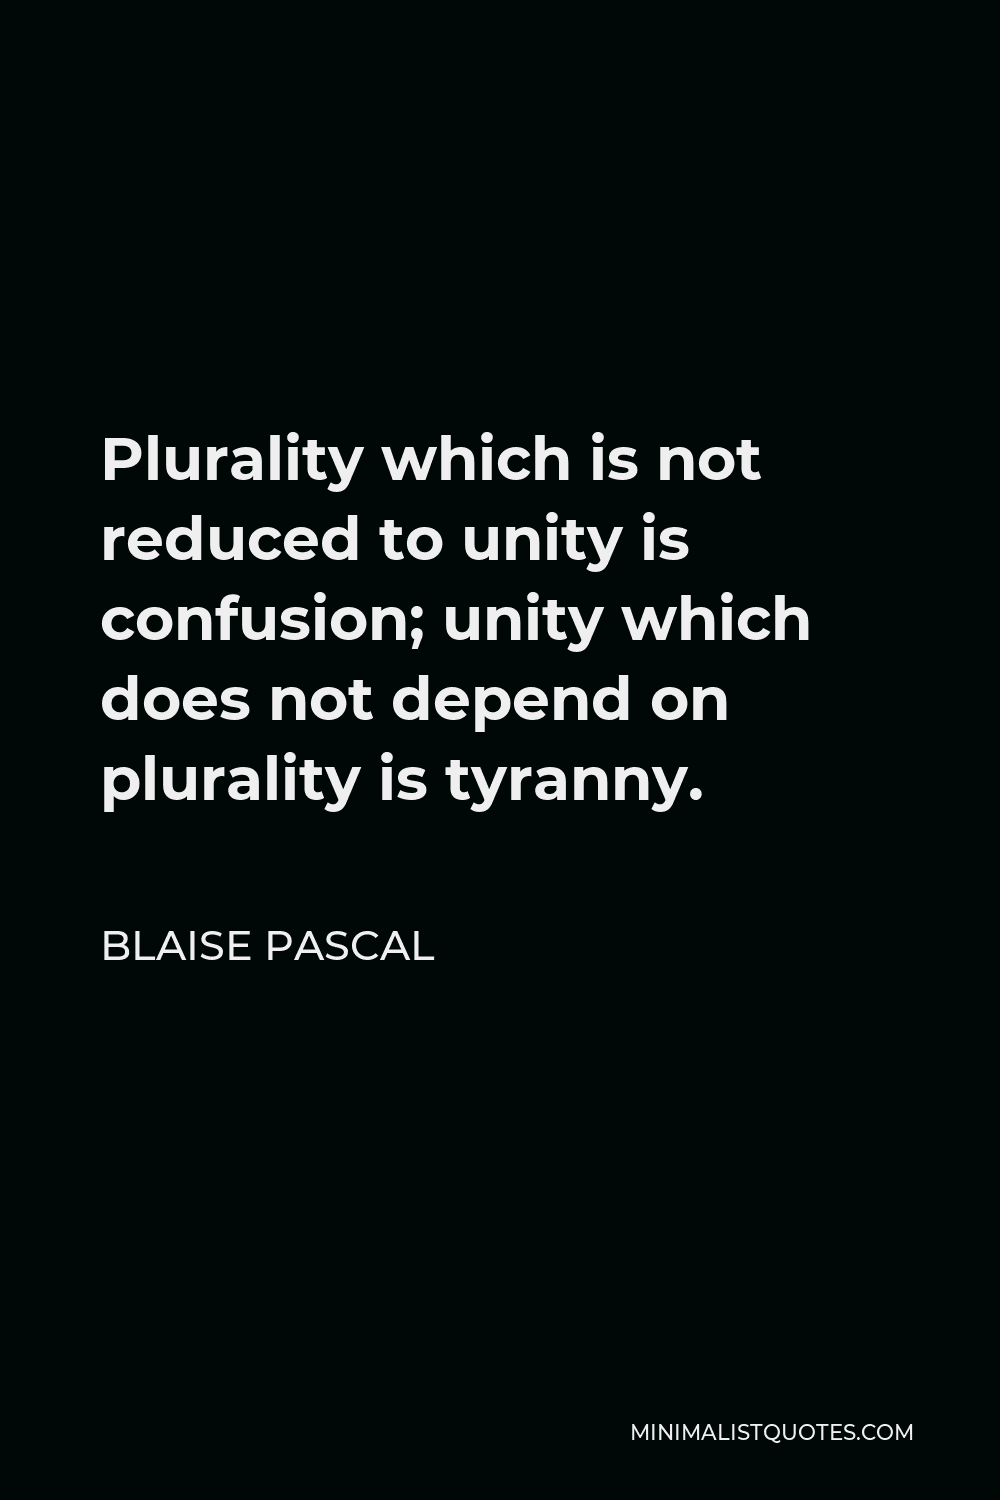 Blaise Pascal Quote - Plurality which is not reduced to unity is confusion; unity which does not depend on plurality is tyranny.